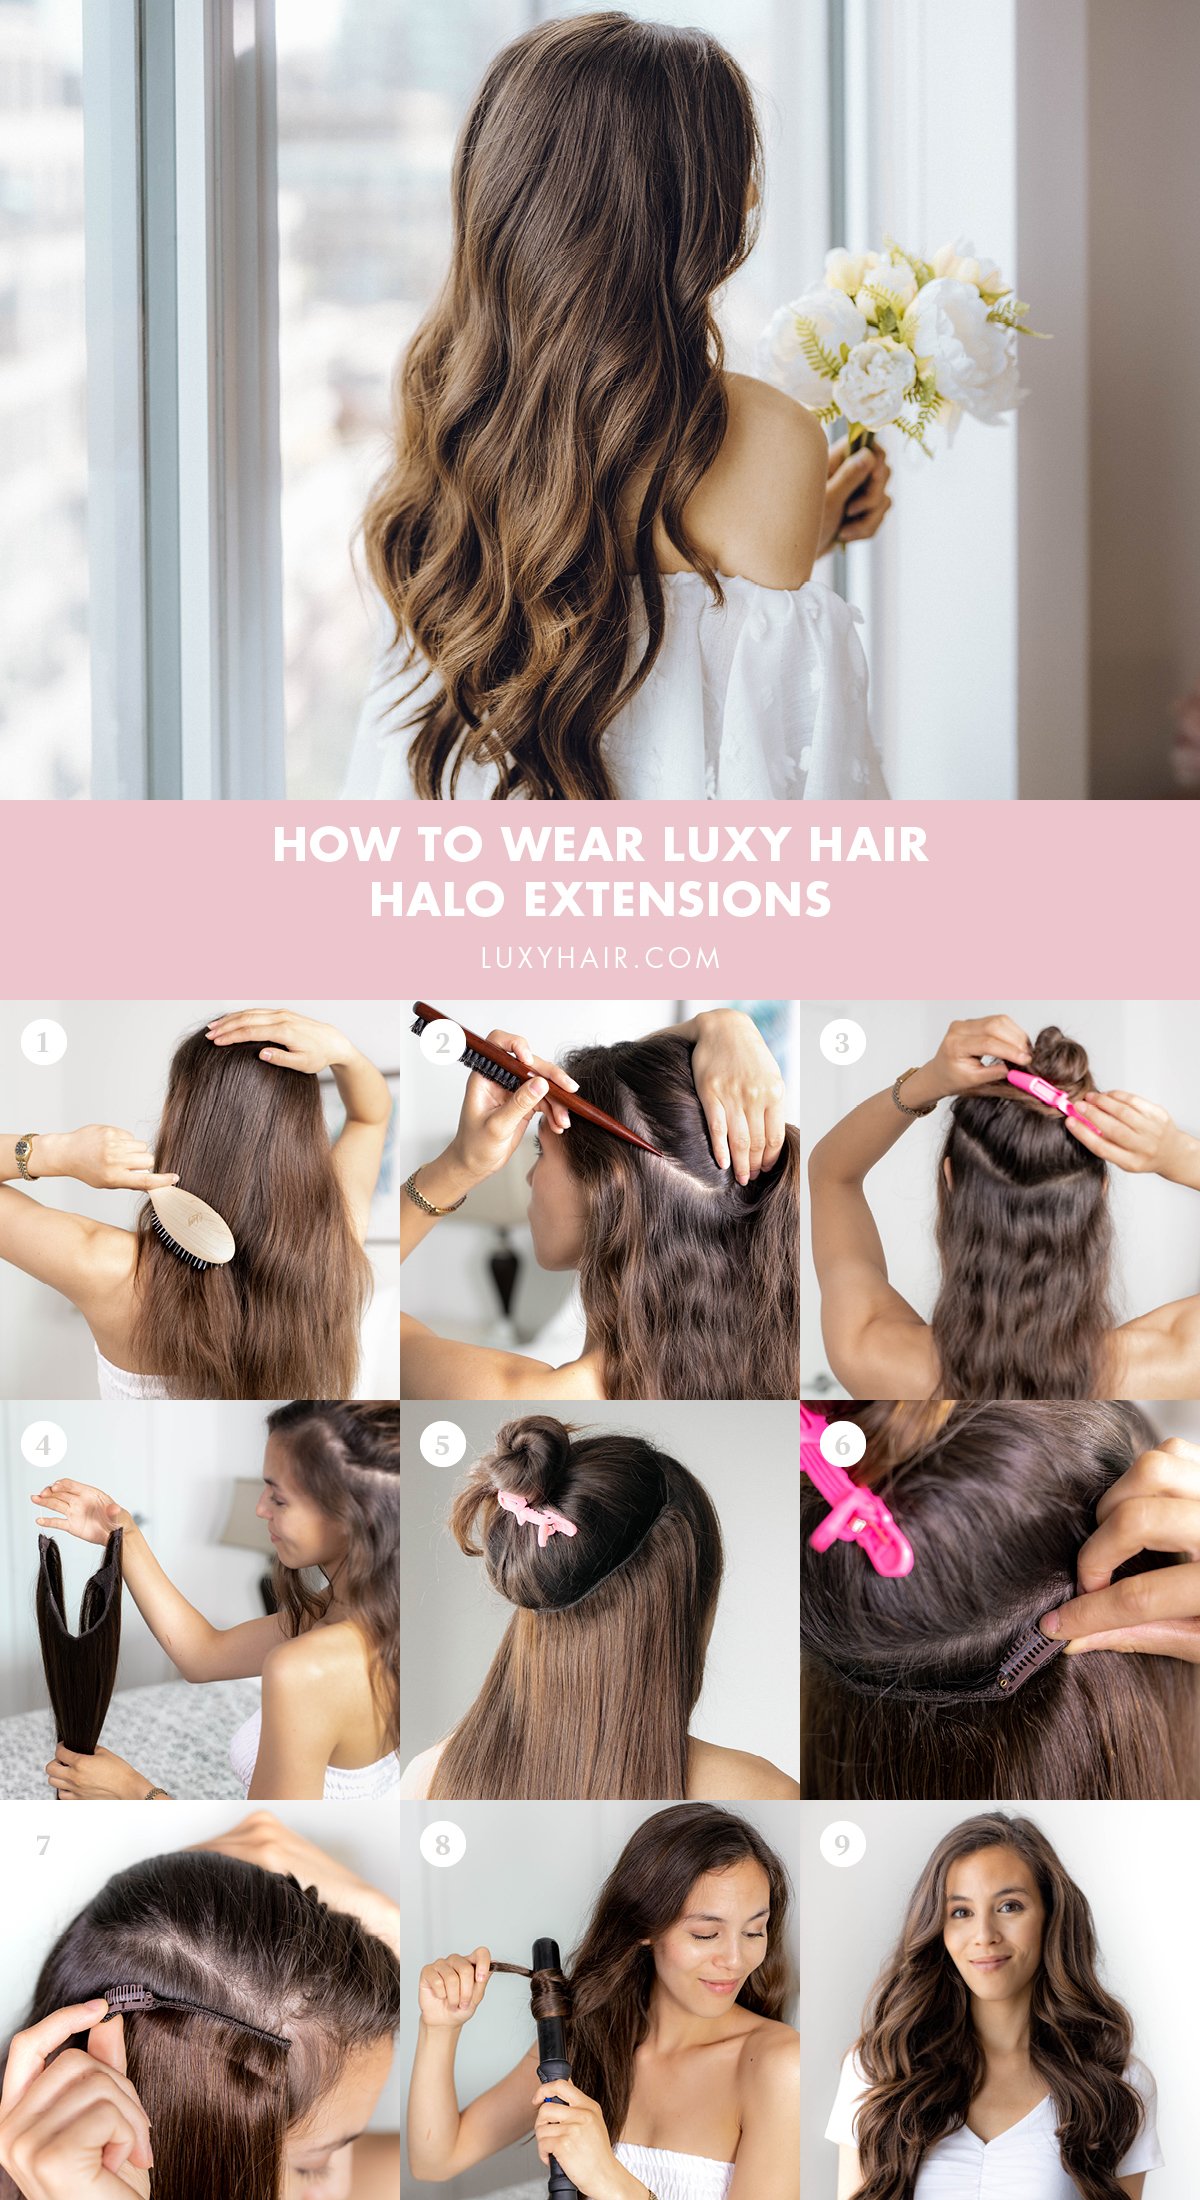 How to wear Halo Hair Extensions